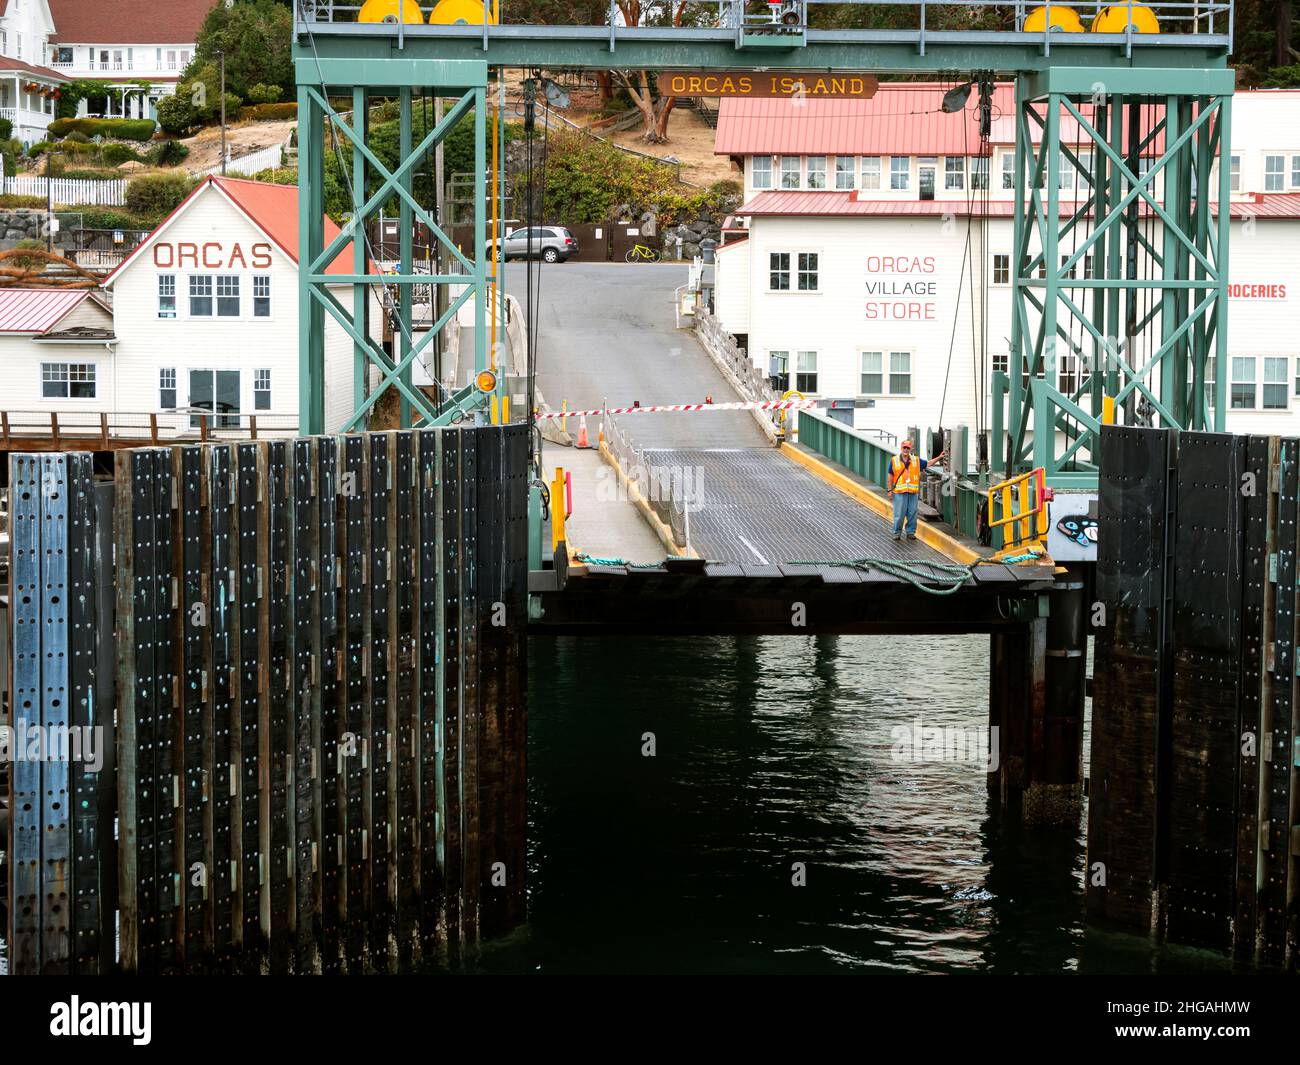 WA21168-00...WASHINGTON - Arriving at the Orcas Island ferry dock located in Orcas Village. Stock Photo